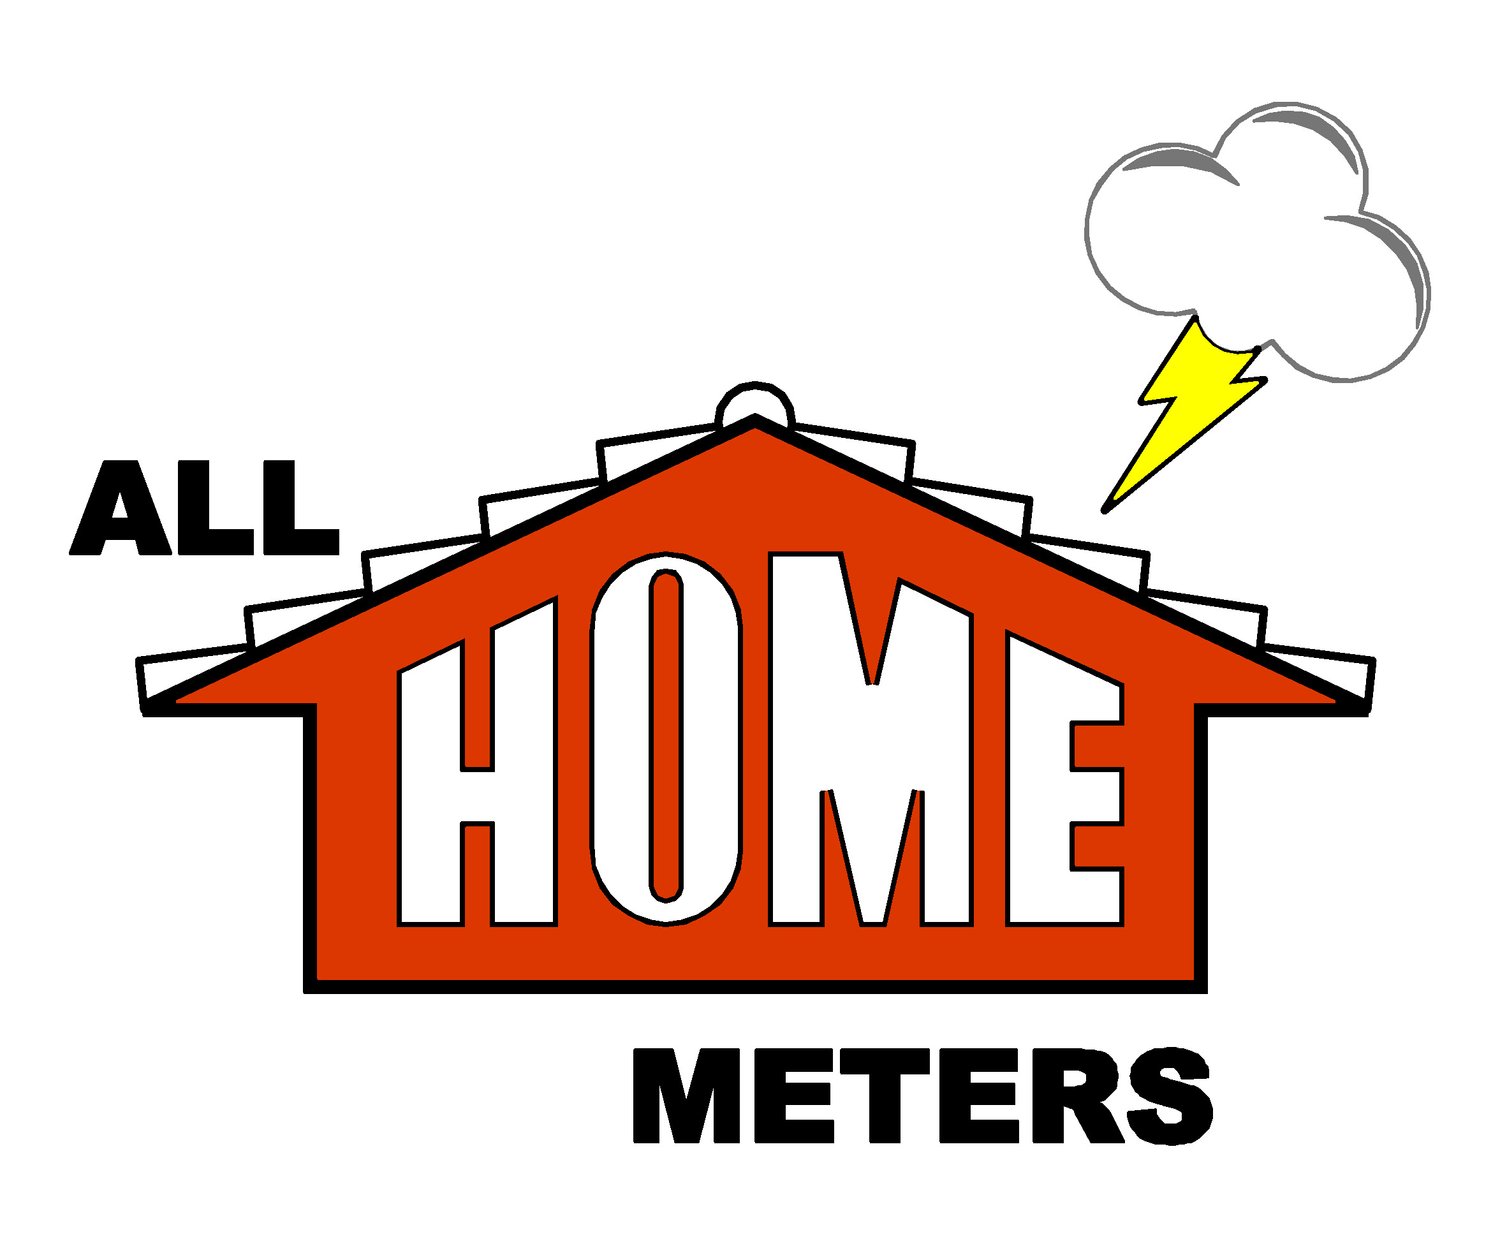 ALL HOME METERS.